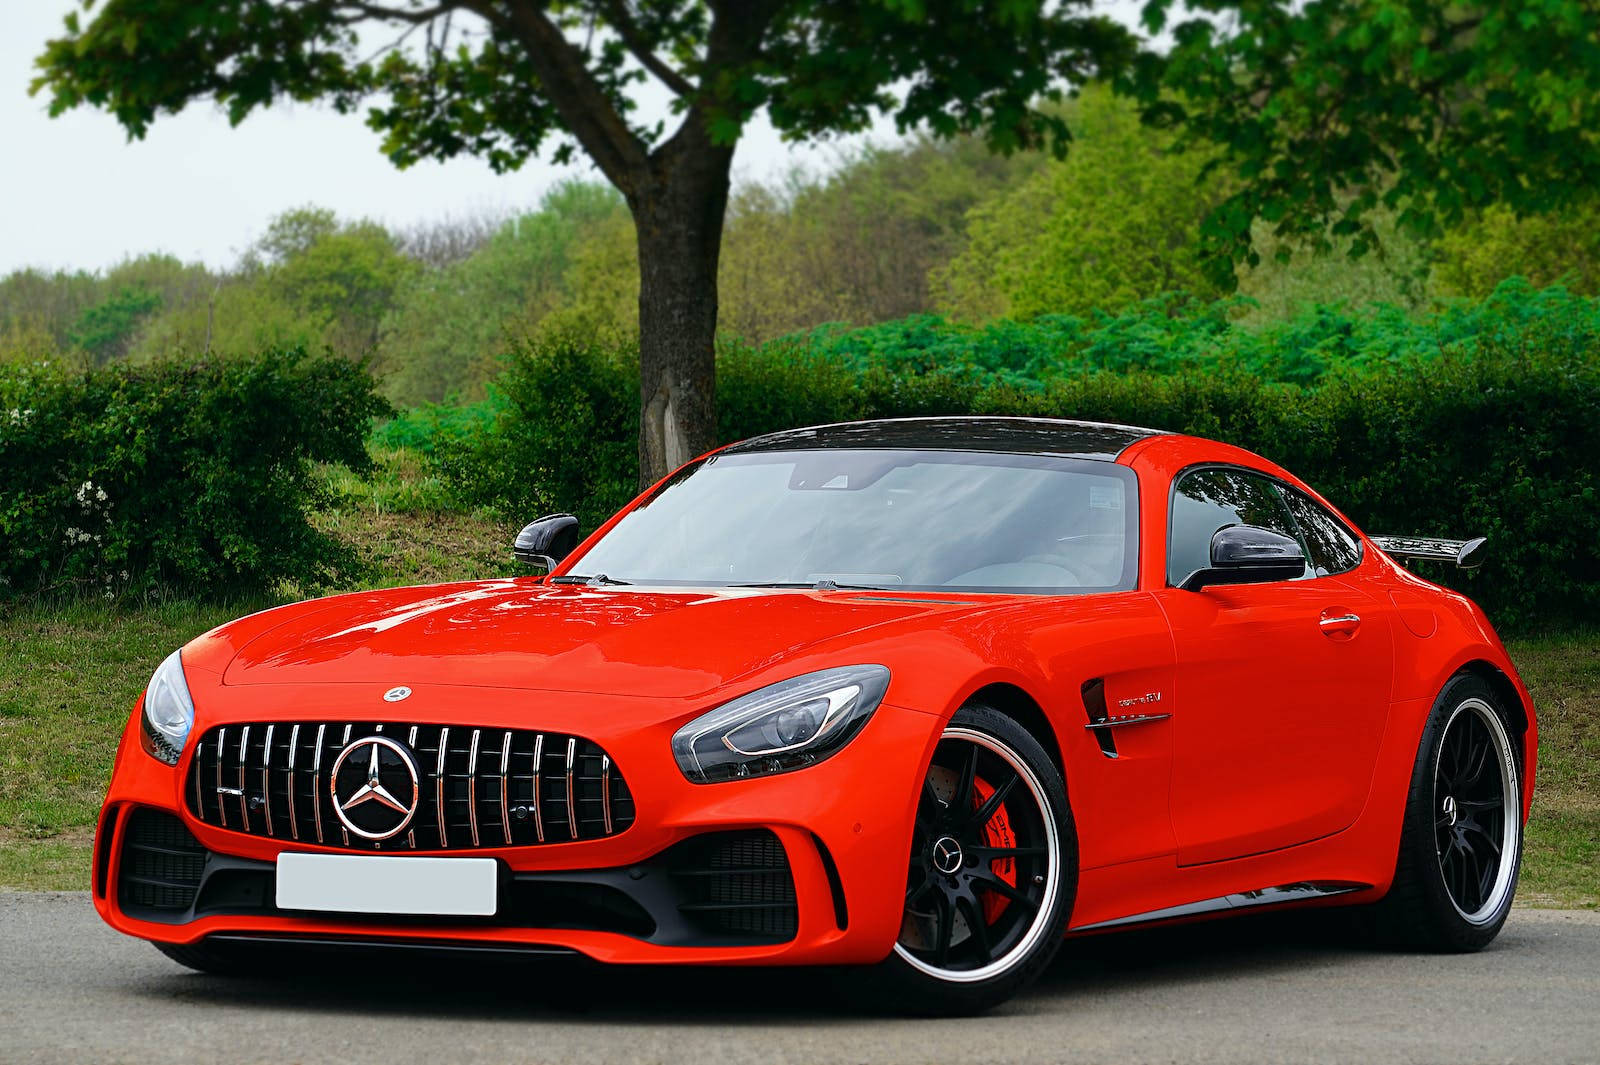 Showcasing Speed And Elegance: Red Mercedes-amg Gt Luxury Car